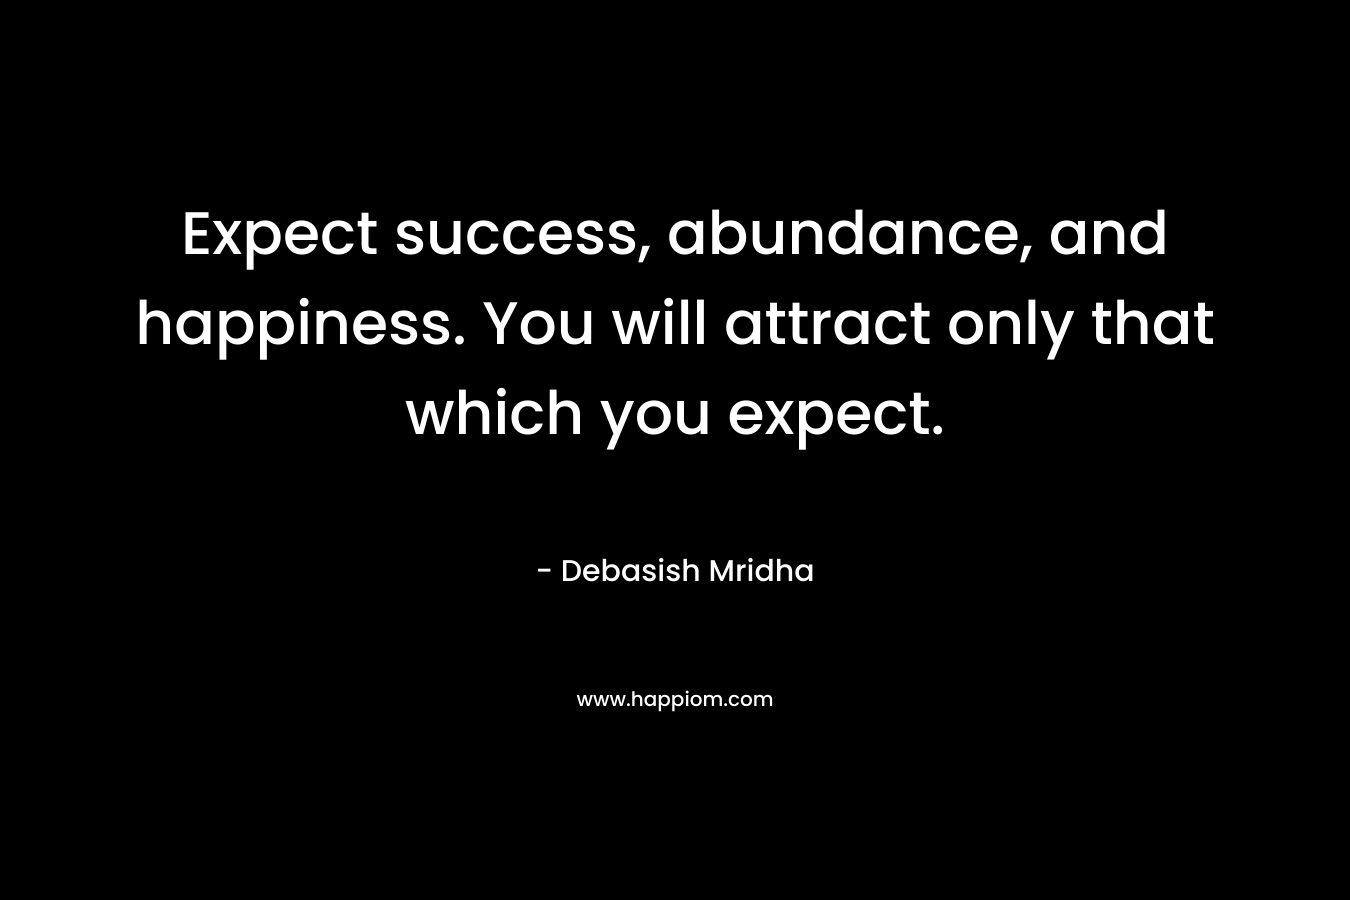 Expect success, abundance, and happiness. You will attract only that which you expect.